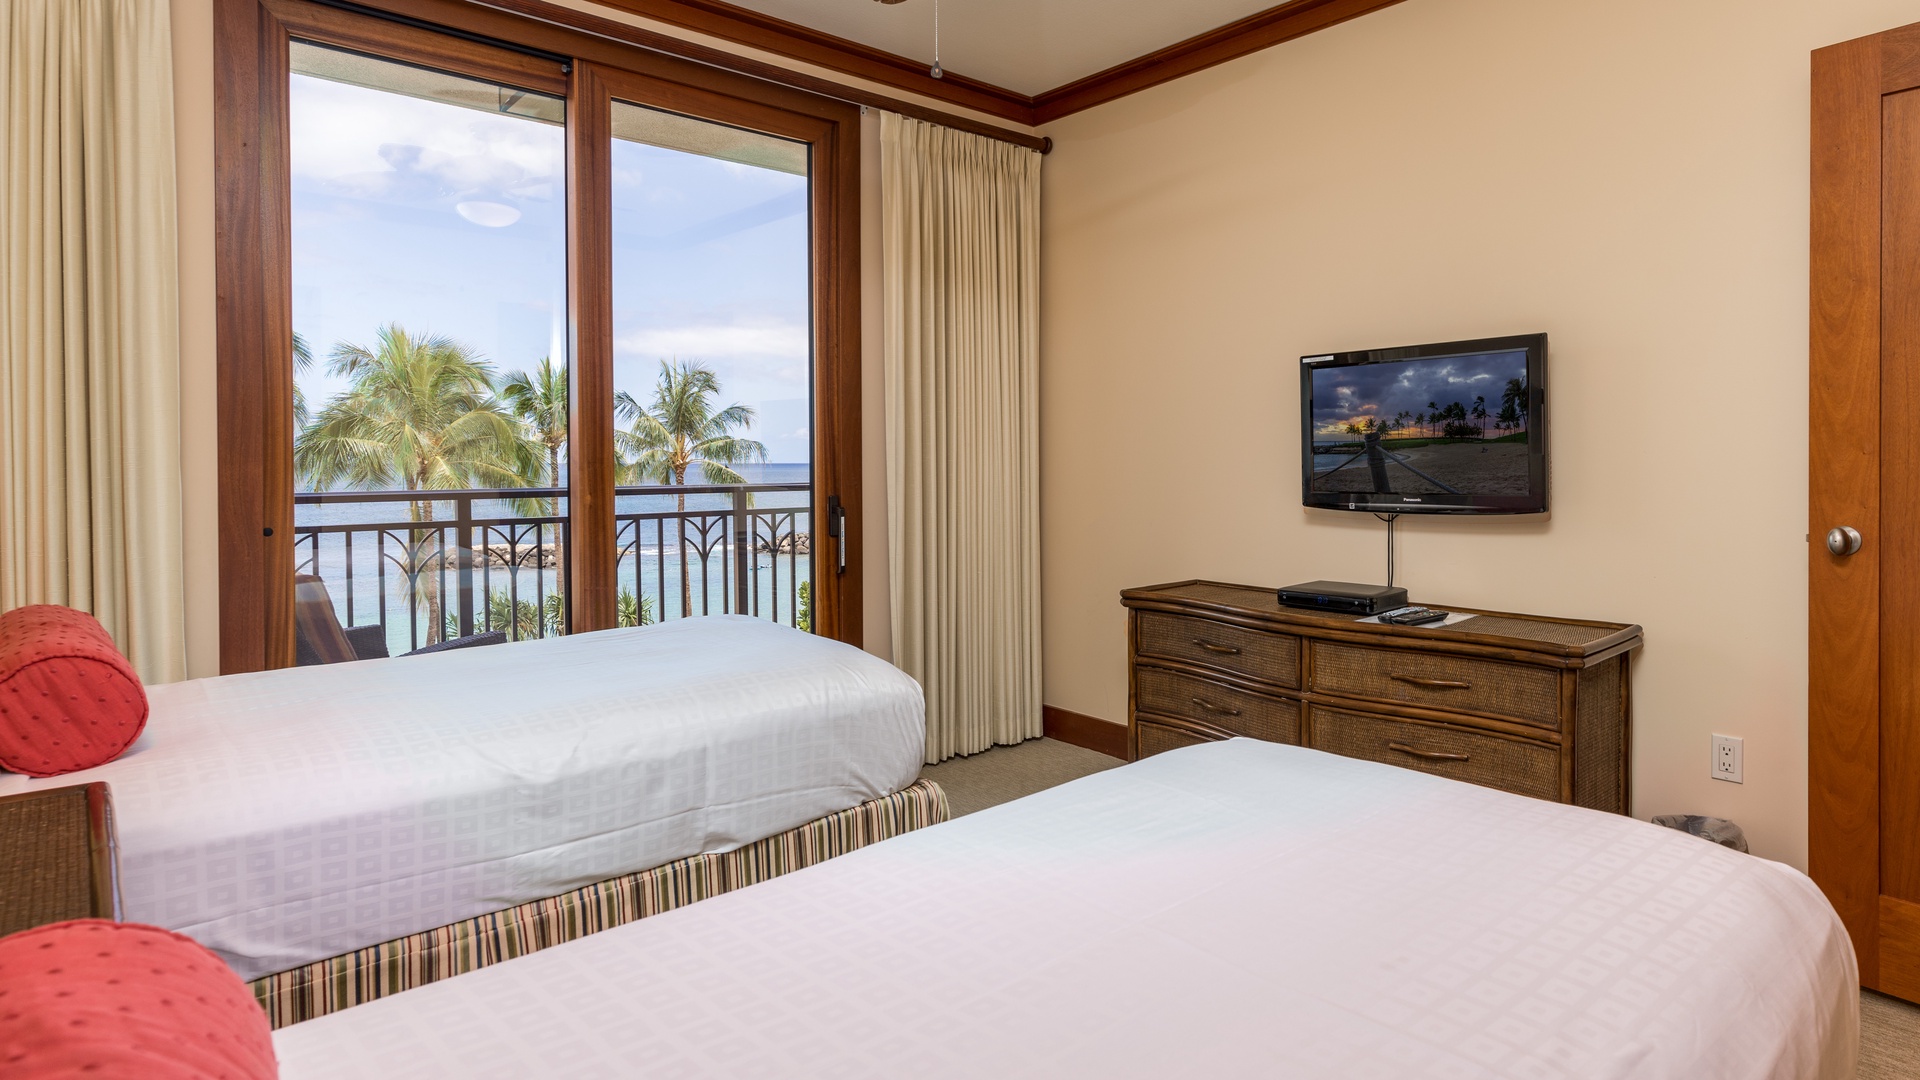 Kapolei Vacation Rentals, Ko Olina Beach Villas B310 - The spacious second guest bedroom with TV and a dresser.